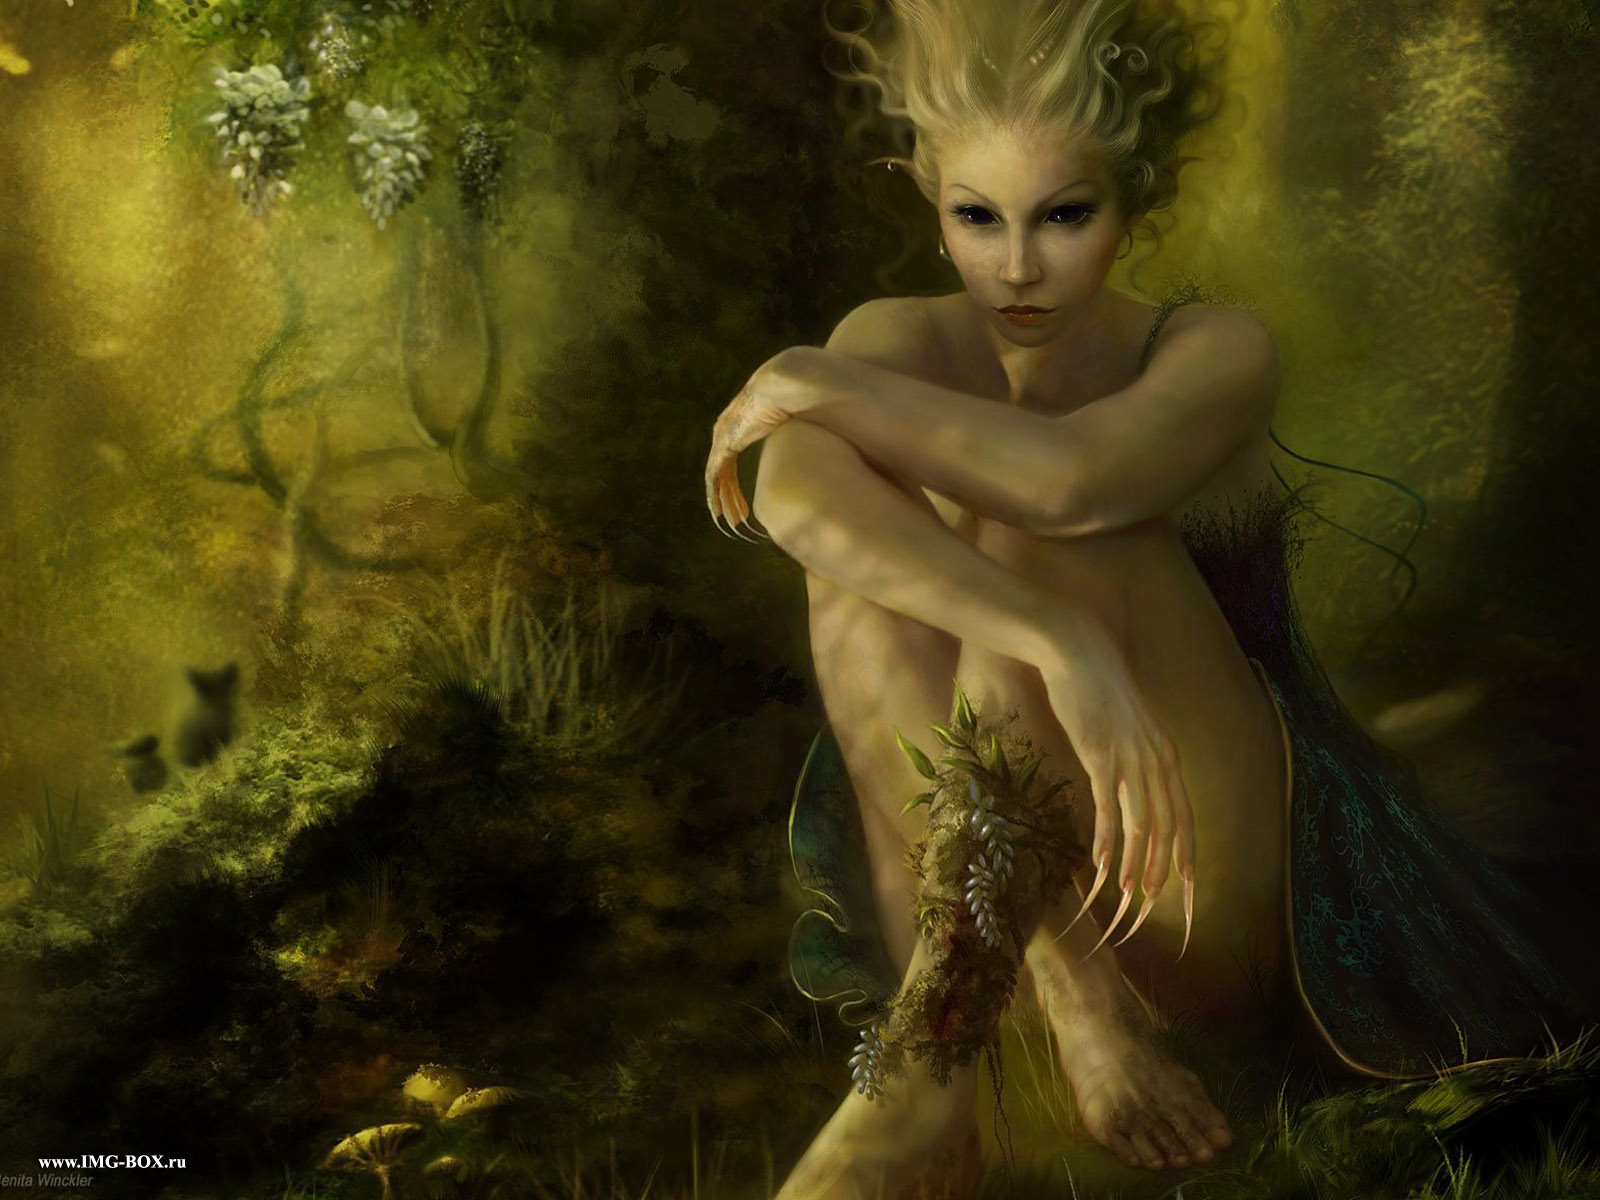 Forest fairy - Best wallpapers on your desktop: Fantasy